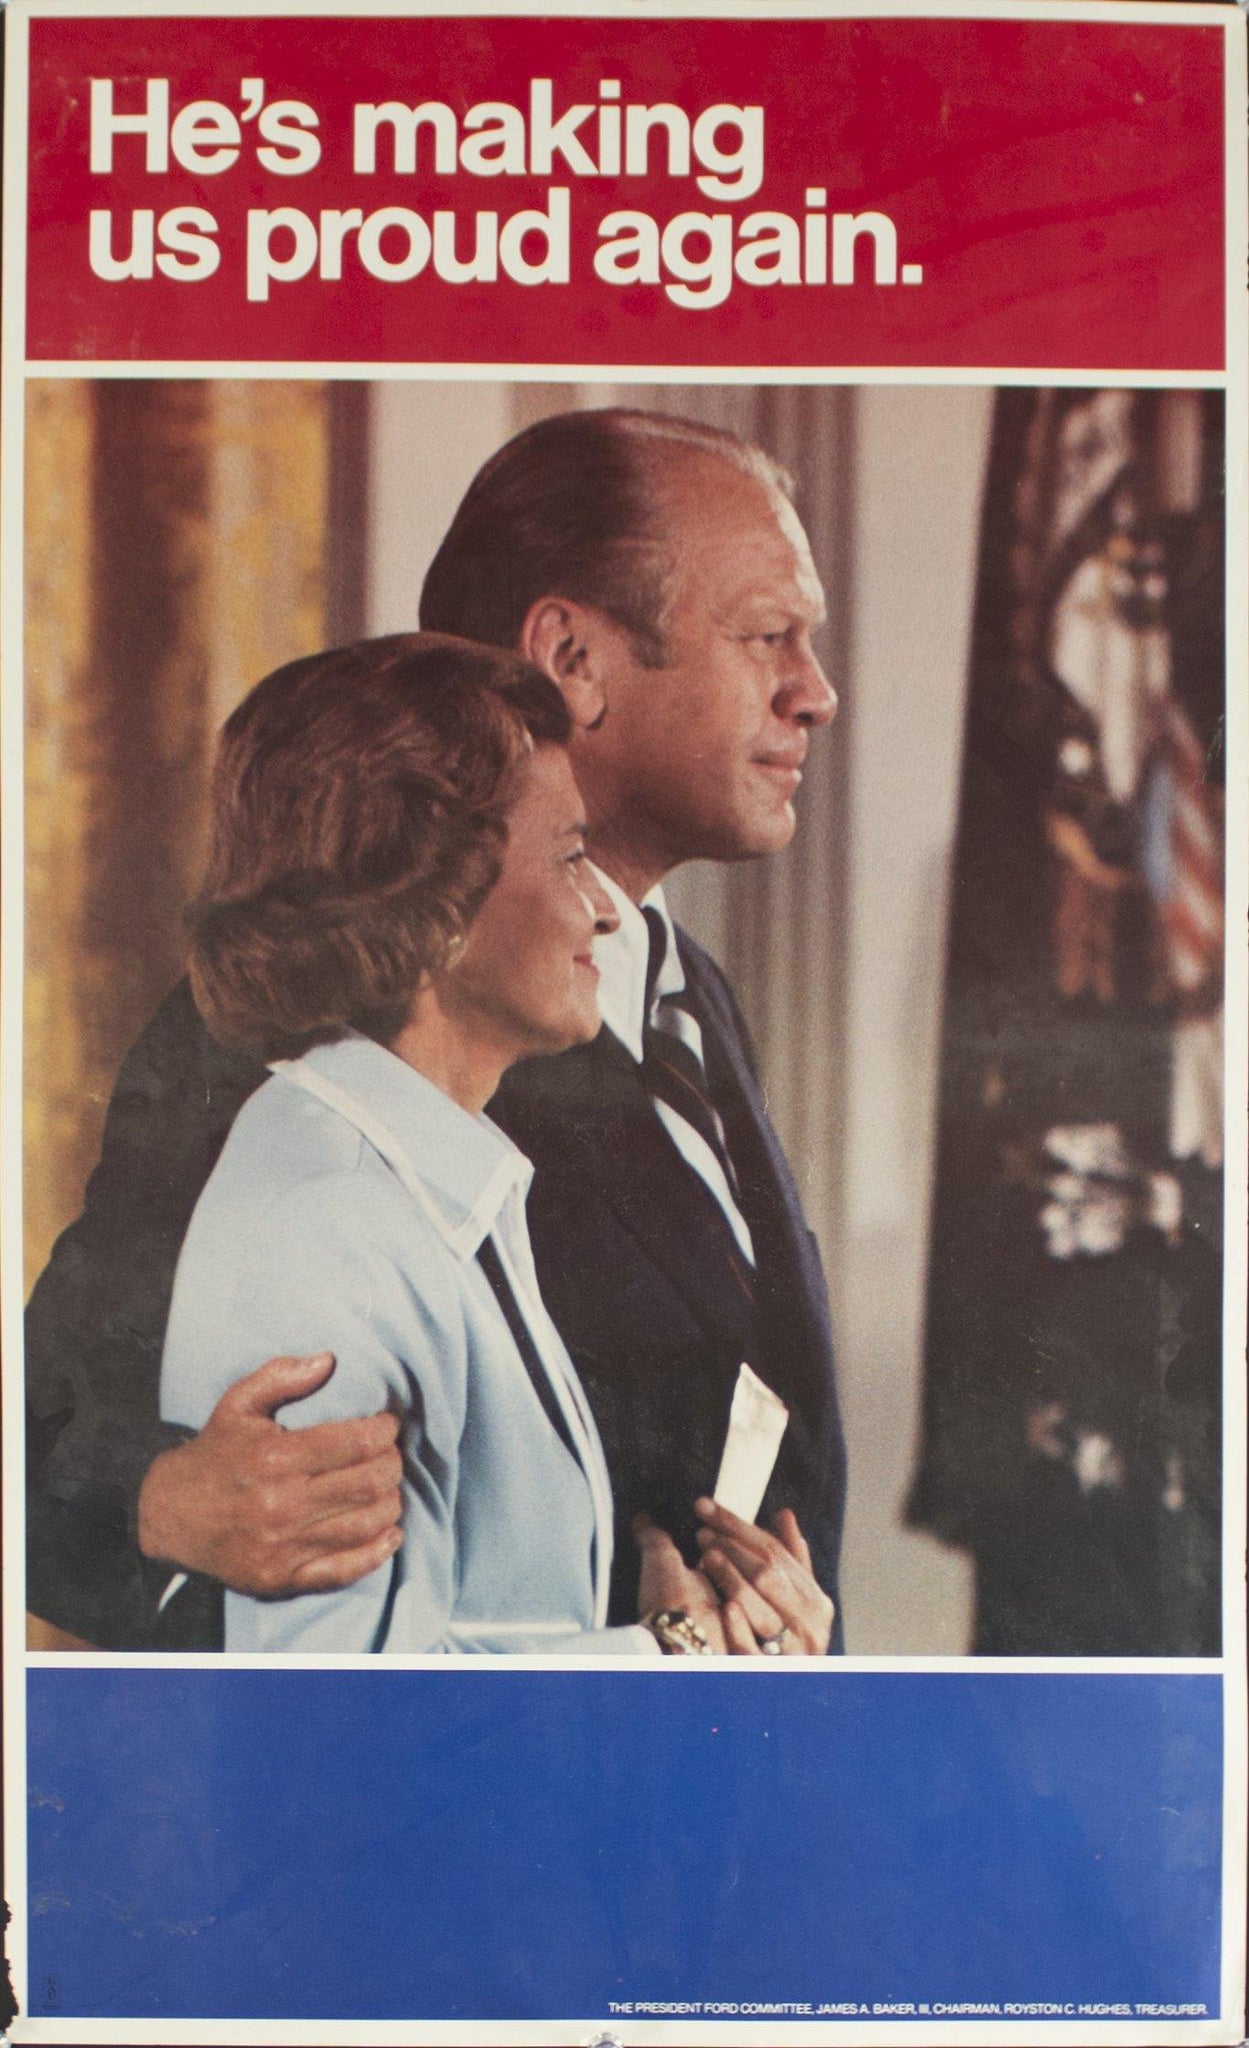 1976 He's making us proud again. | Gerald Ford - Golden Age Posters